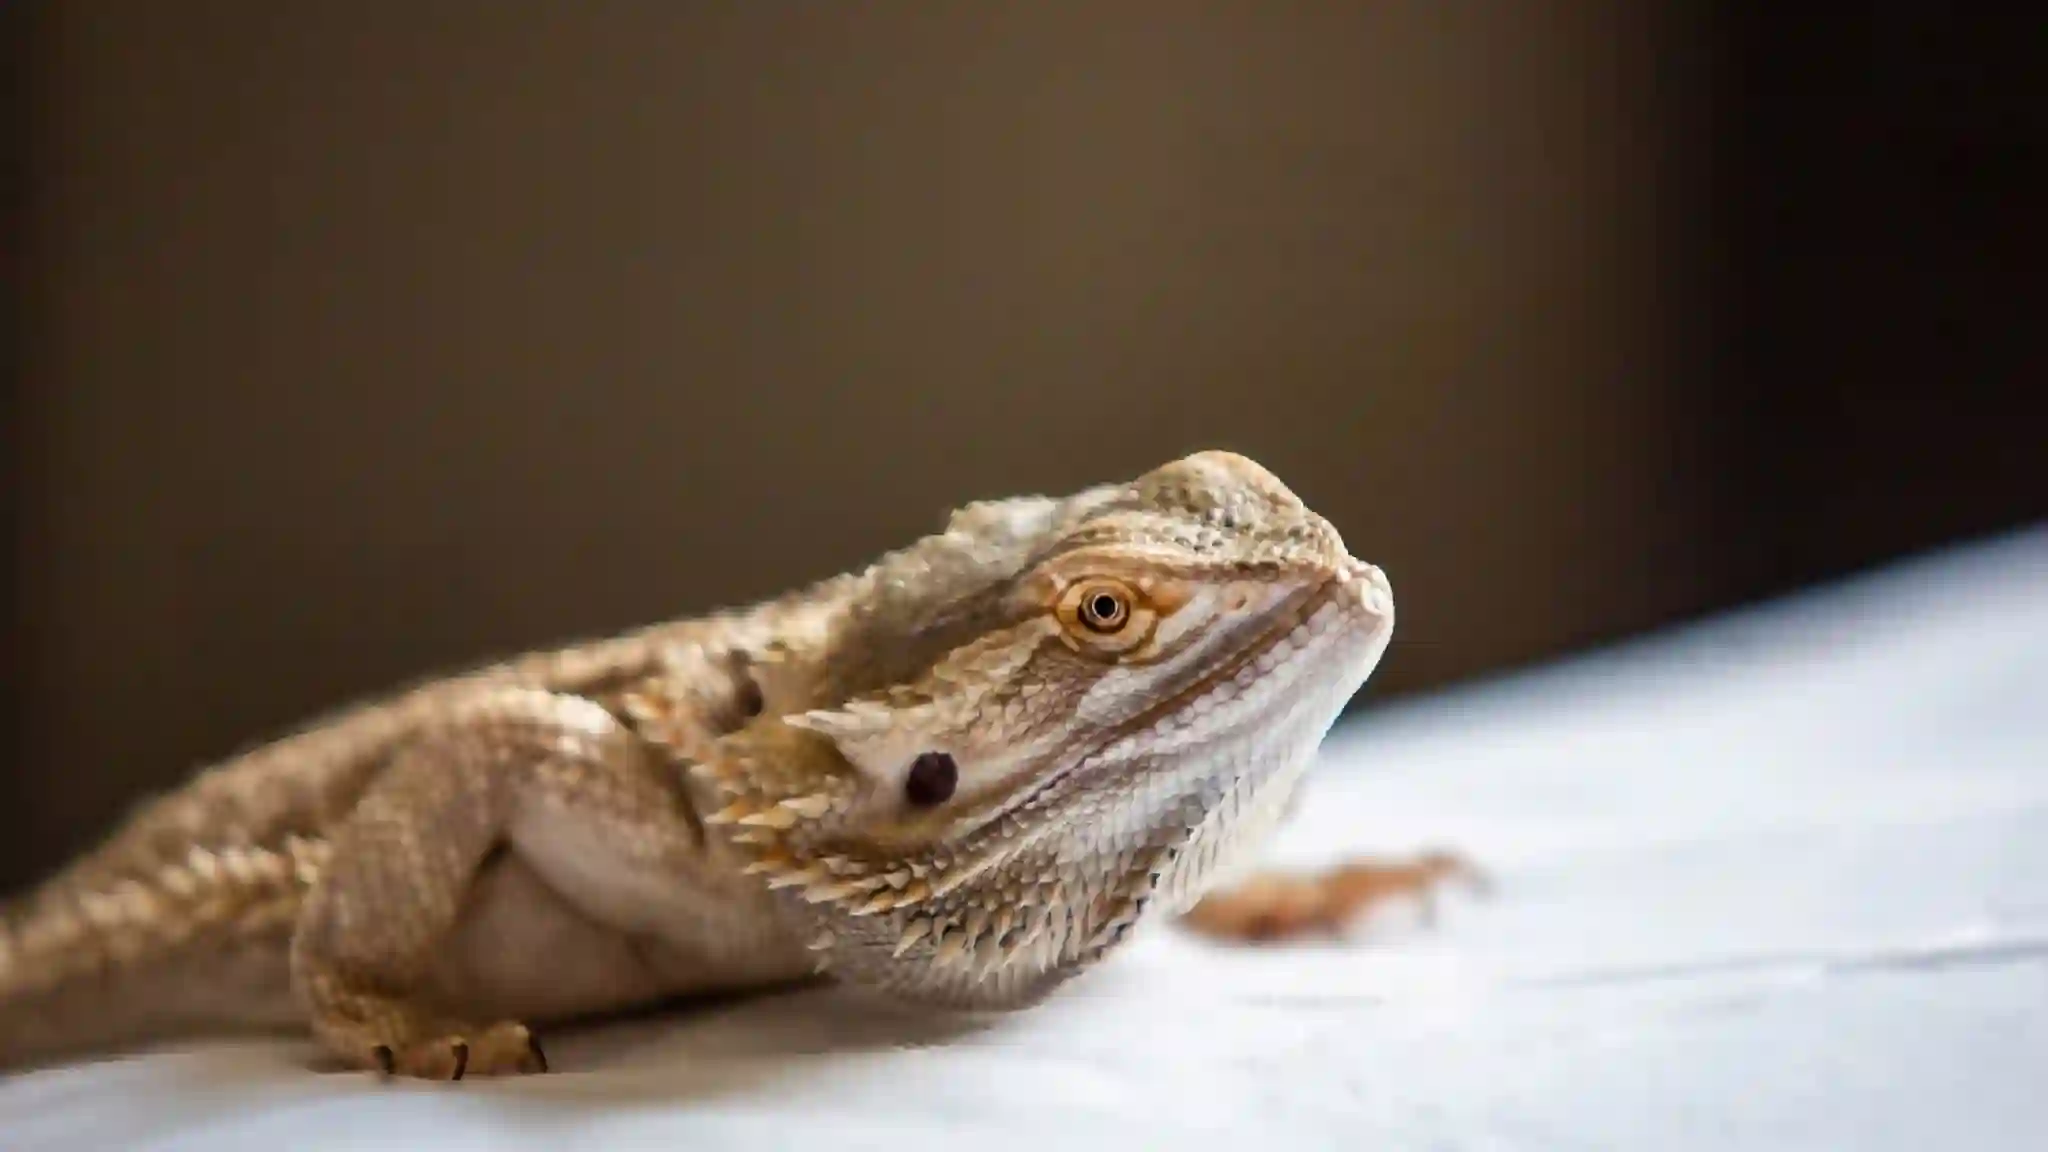 Can Bearded Dragons Eat Wet Cat Food?